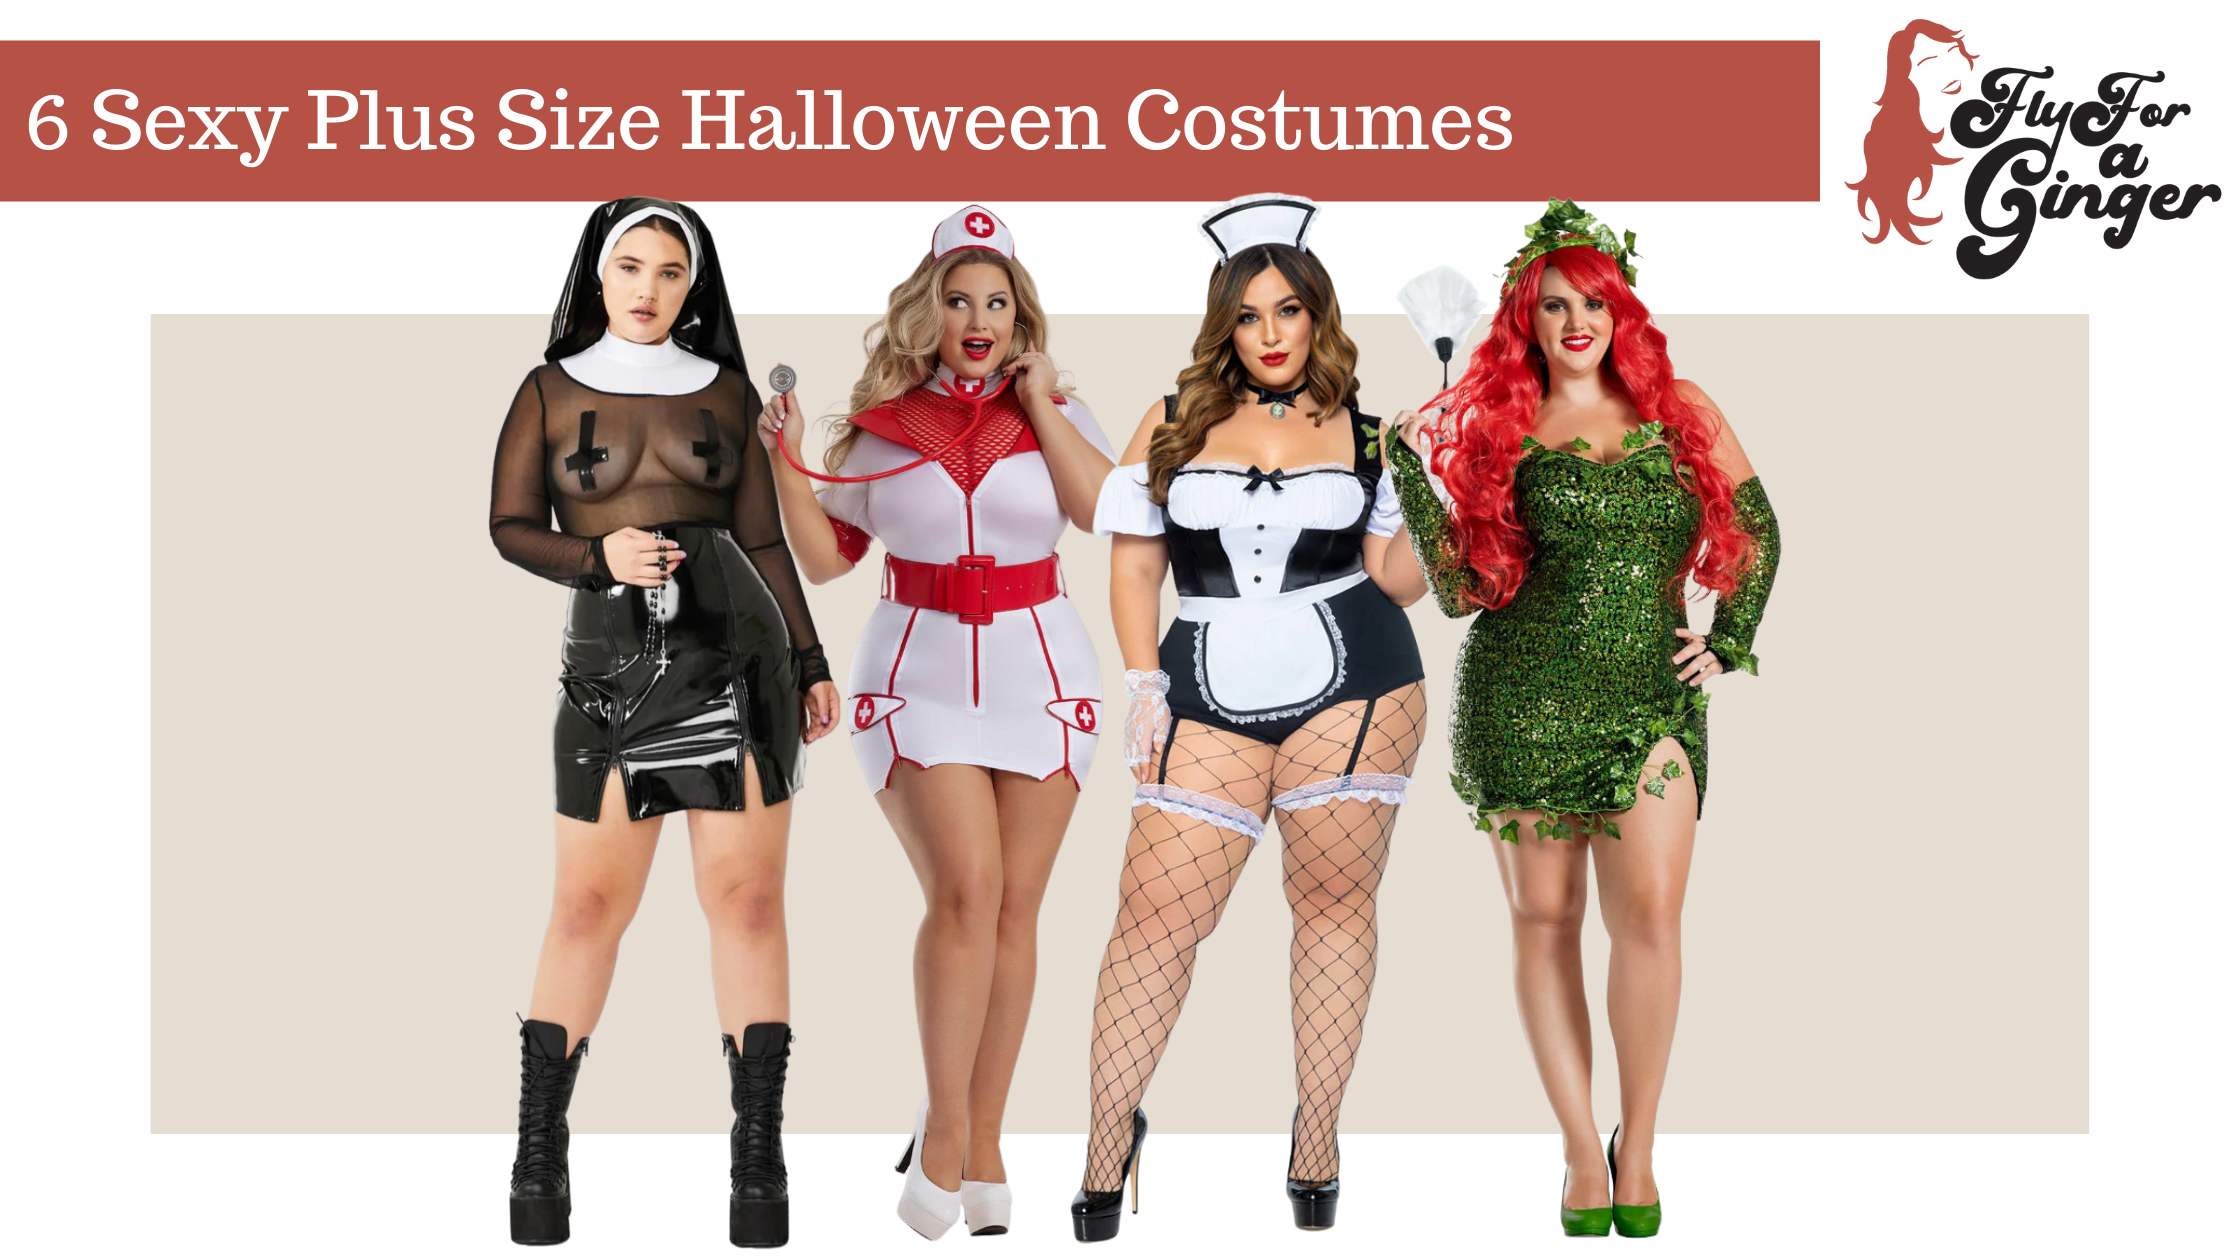 6 Sexy Plus Size Halloween Costumes // Sexy Halloween Costumes for